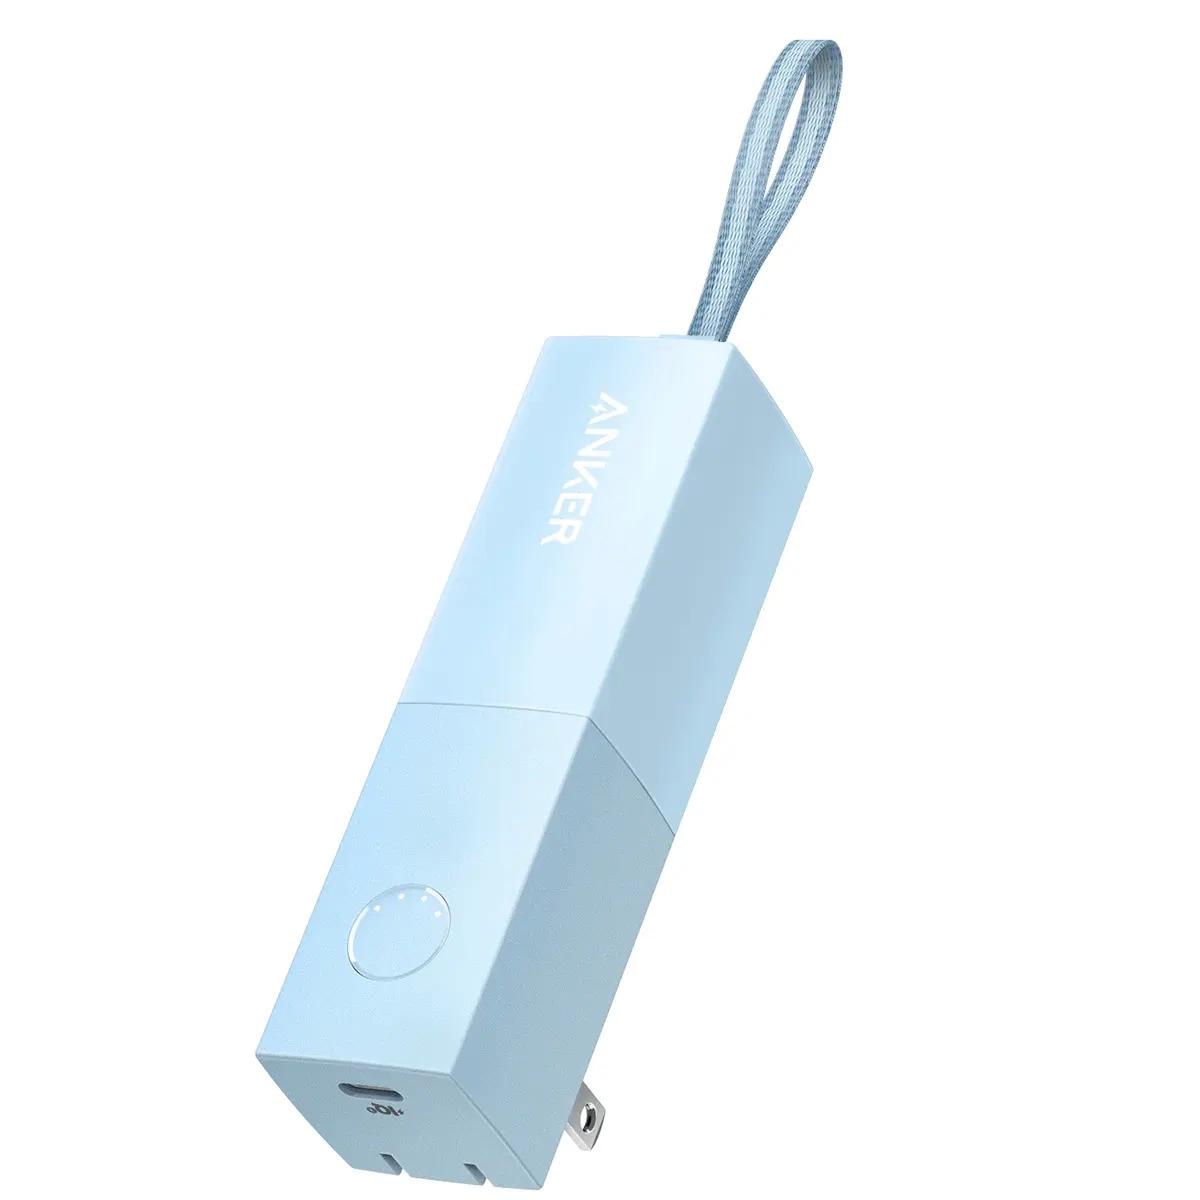 5000mAh 511 Power Bank 2-in-1 Portable Charger for $20 Shipped